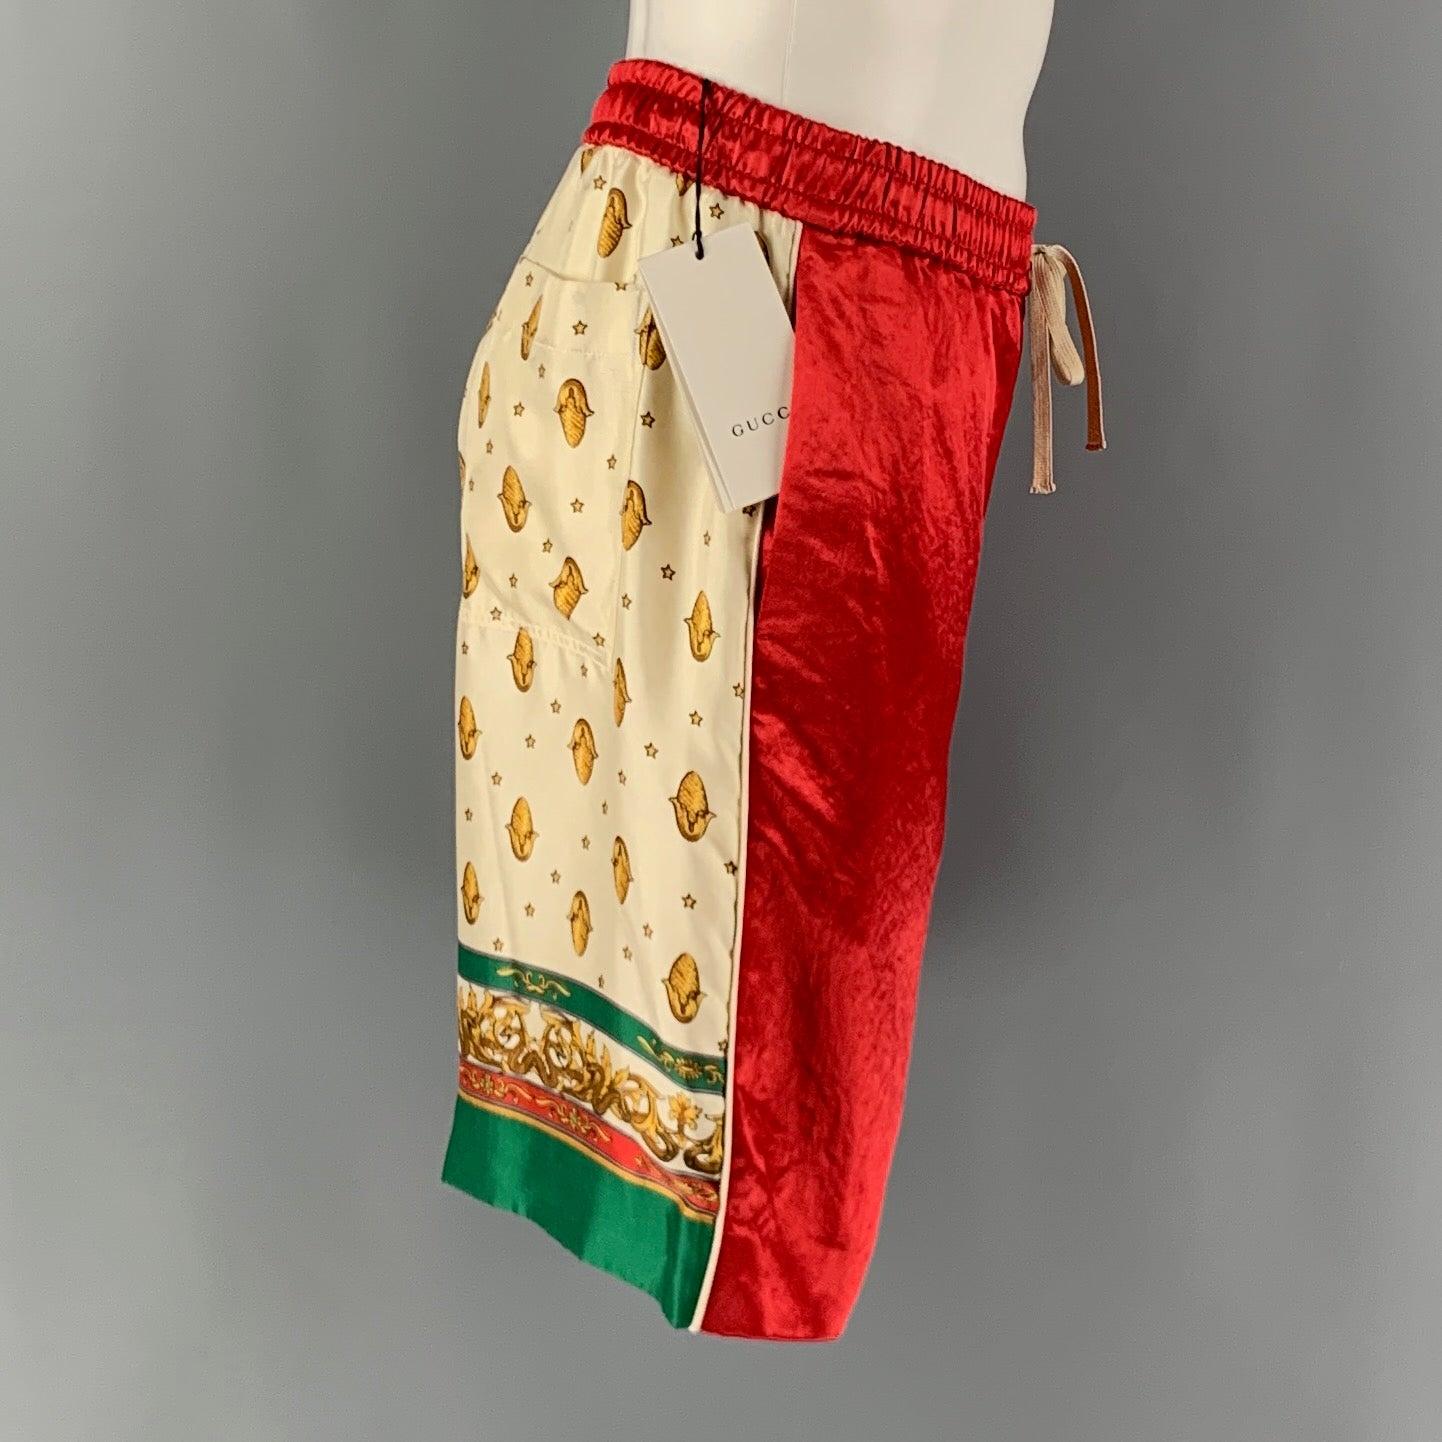 GUCCI 2019 acetate shorts, features a red front, beige and green back with a snake, and stars print. Slit Pockets & Drawstring Closure.
 Made in Italy.New with Tags 

Marked:   46 

Measurements: 
  Waist: 33 inches Rise: 11.5 inInseam: 9.5 inches